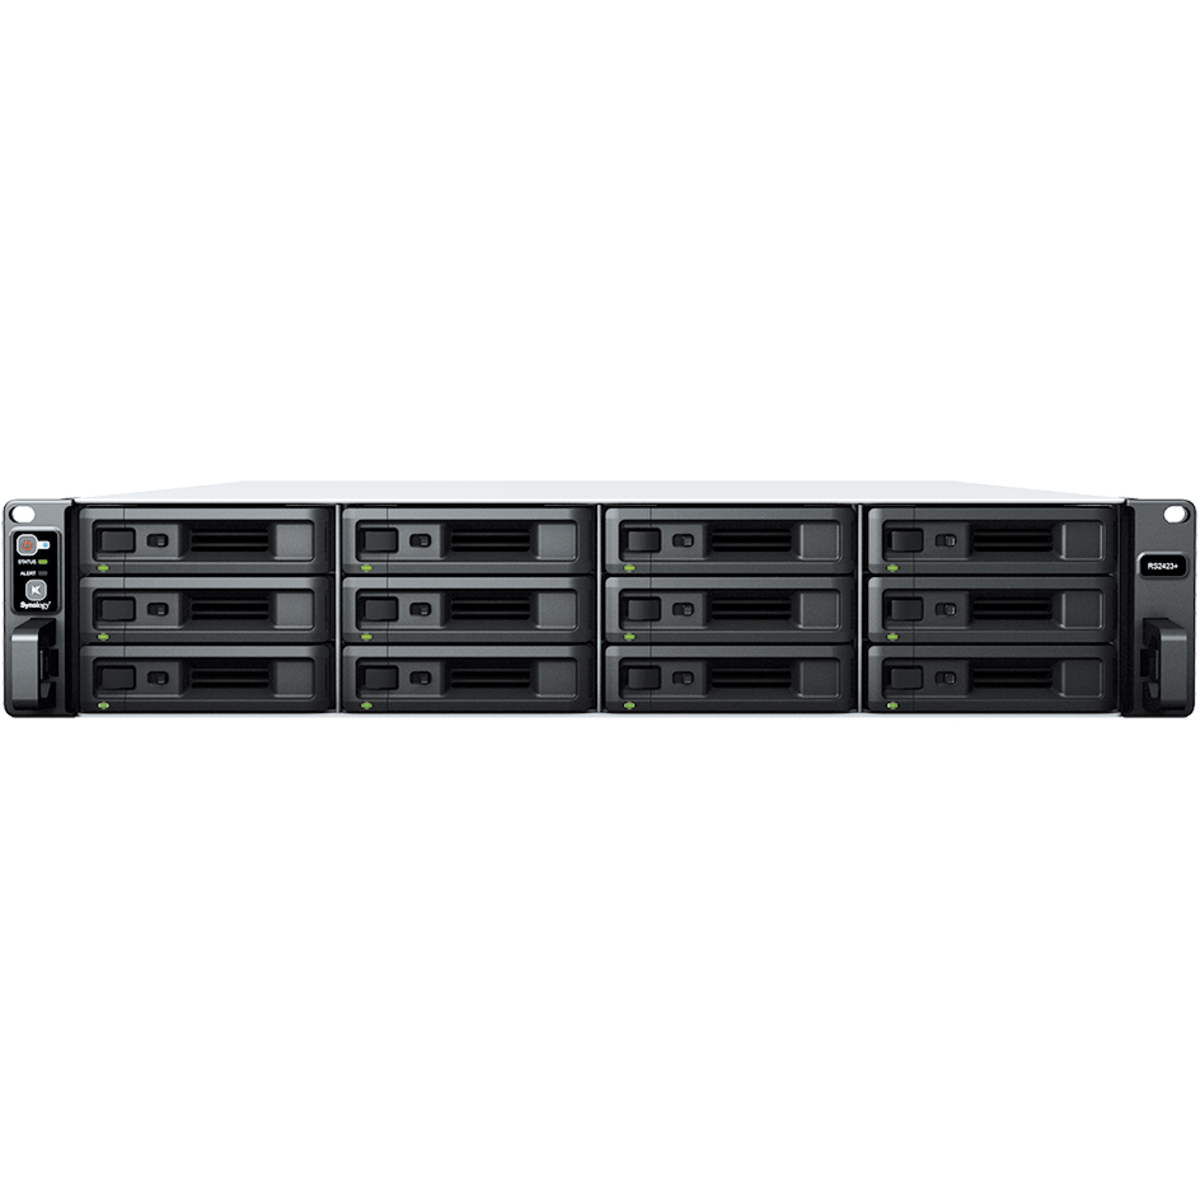 buy Synology RackStation RS2423+ 288tb RackMount NAS - Network Attached Storage Device 12x24000gb Western Digital Ultrastar HC580 WUH722424ALE6L4 3.5 7200rpm SATA 6Gb/s HDD ENTERPRISE Class Drives Installed - Burn-In Tested - nas headquarters buy network attached storage server device das new raid-5 free shipping simply usa RackStation RS2423+